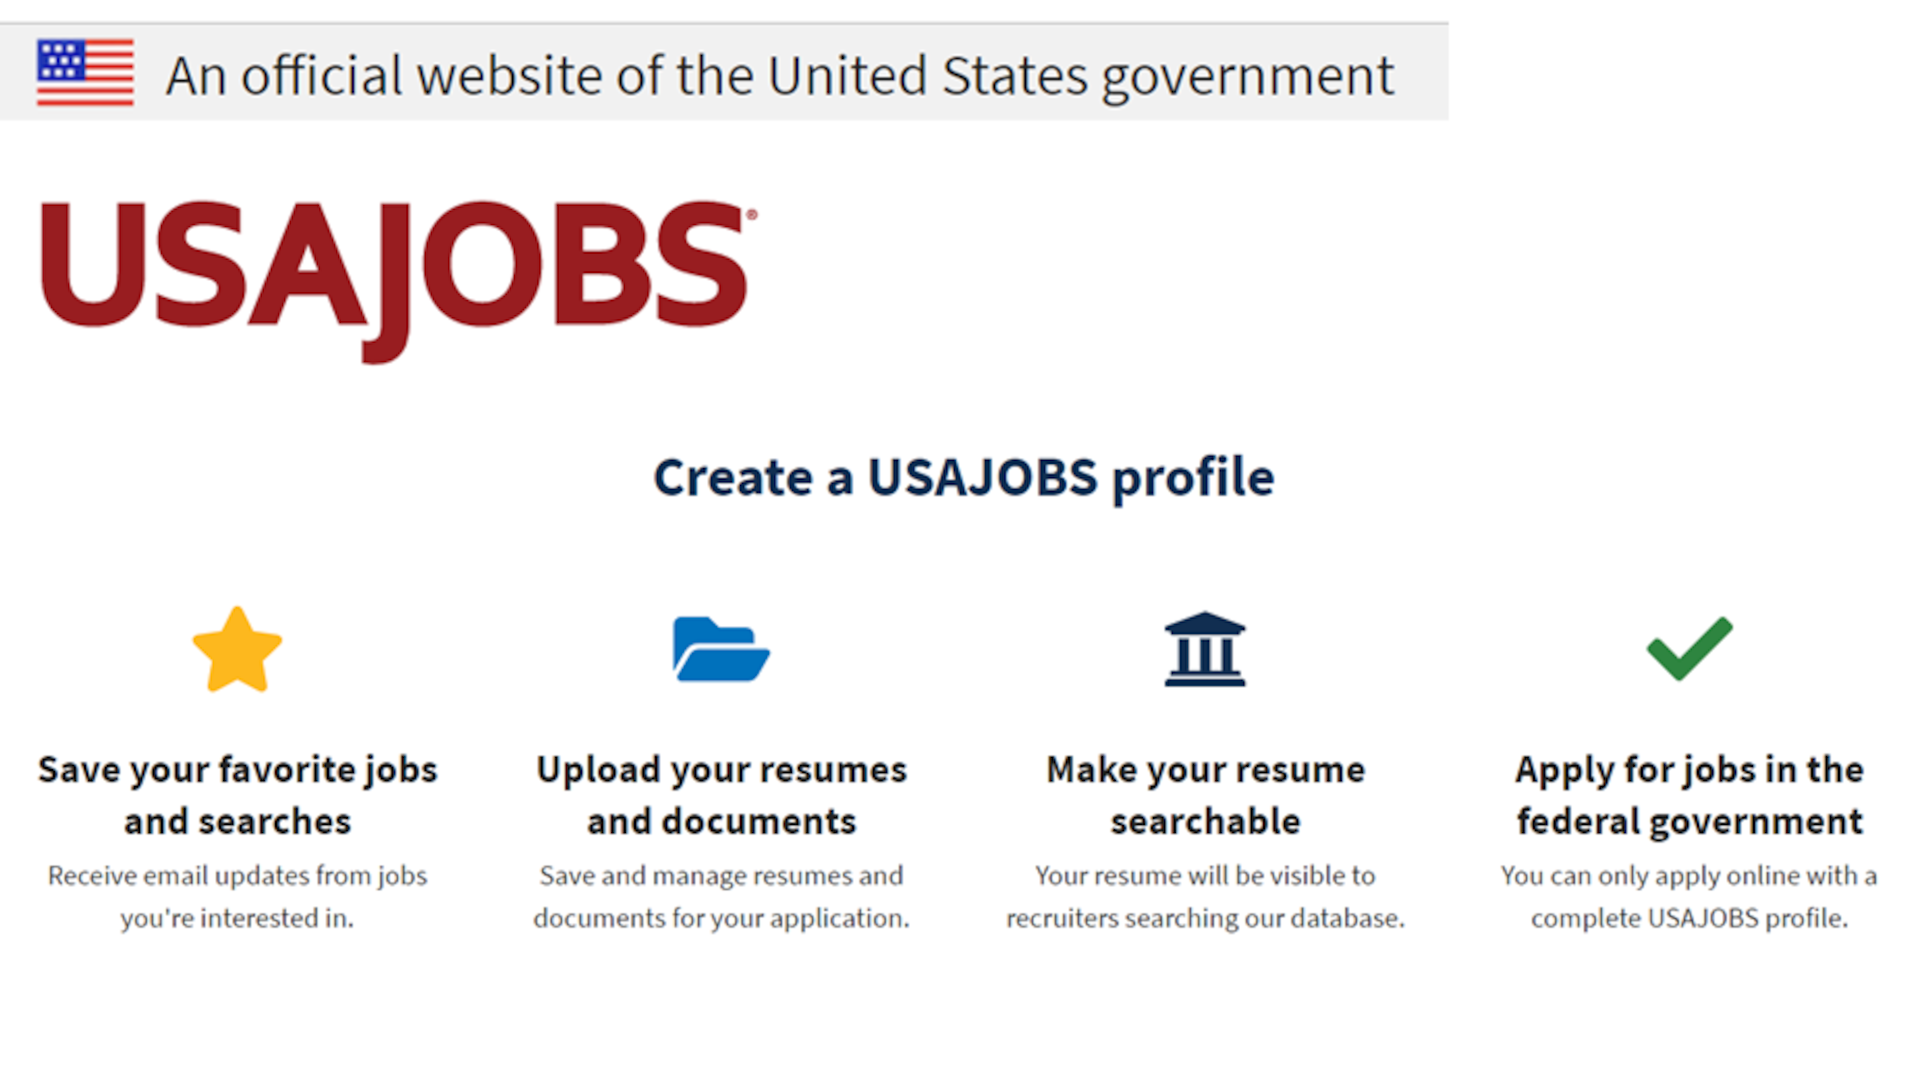 USAJOBS graphic